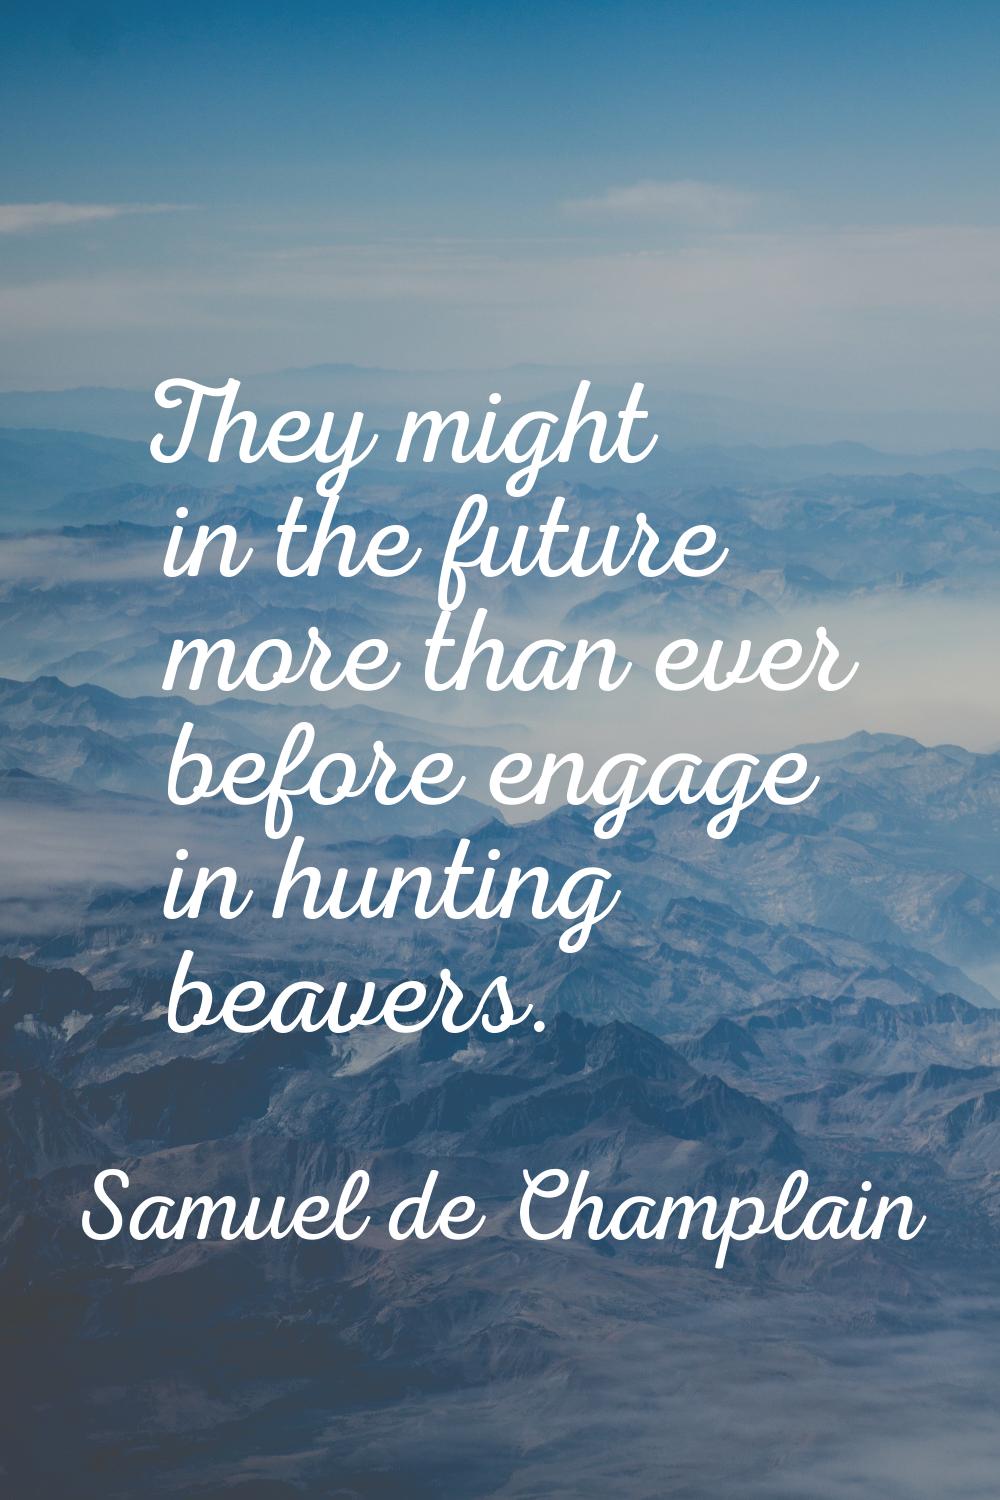 They might in the future more than ever before engage in hunting beavers.